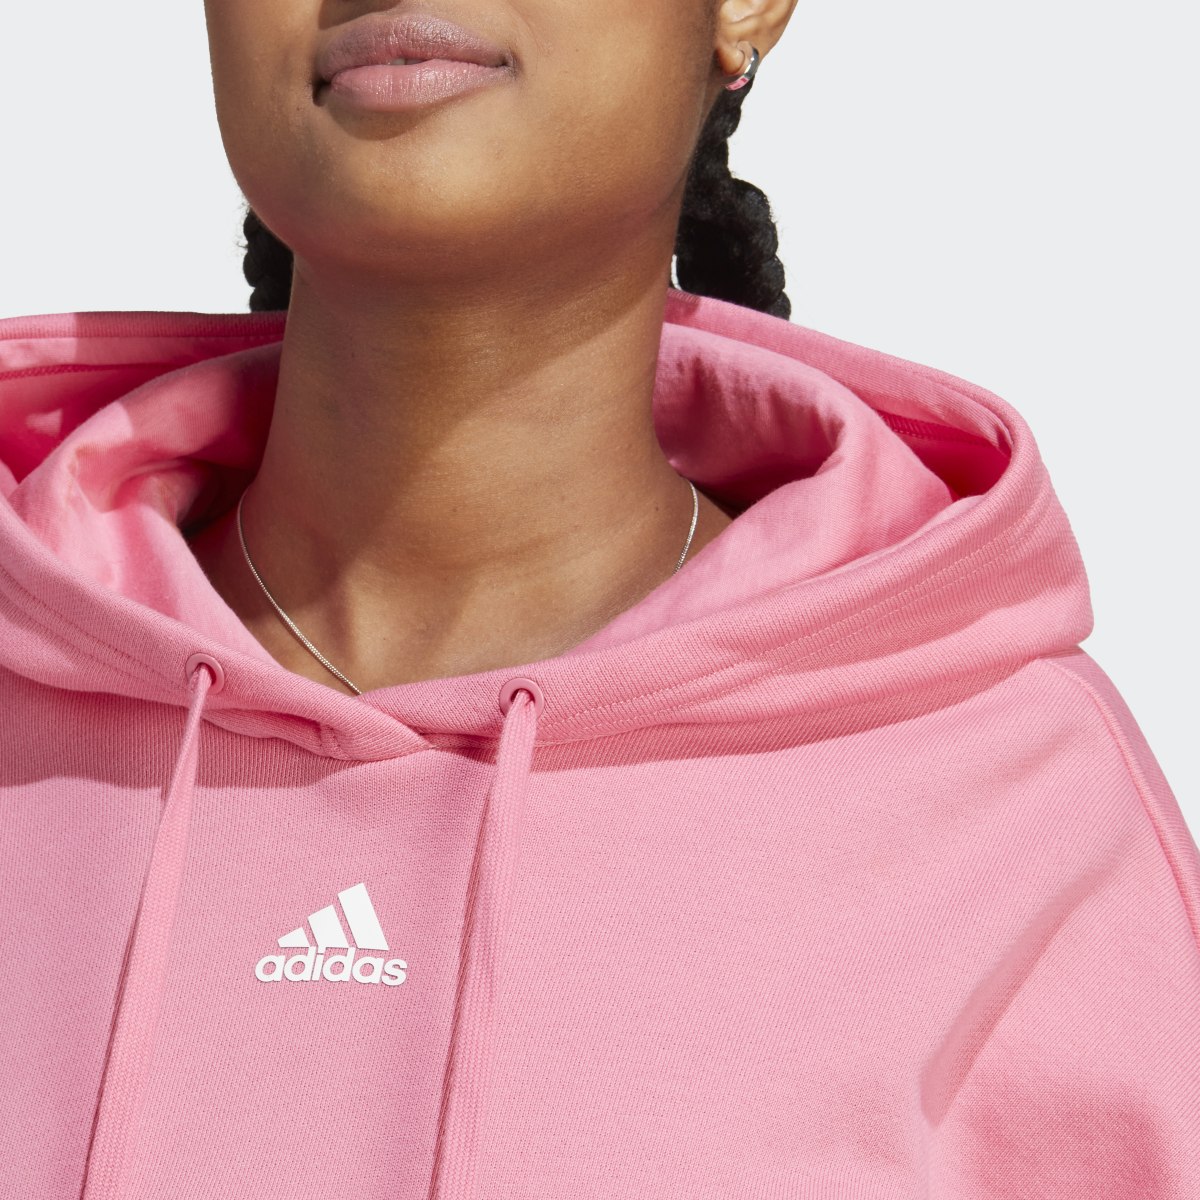 Adidas Collective Power Cropped Hoodie. 6